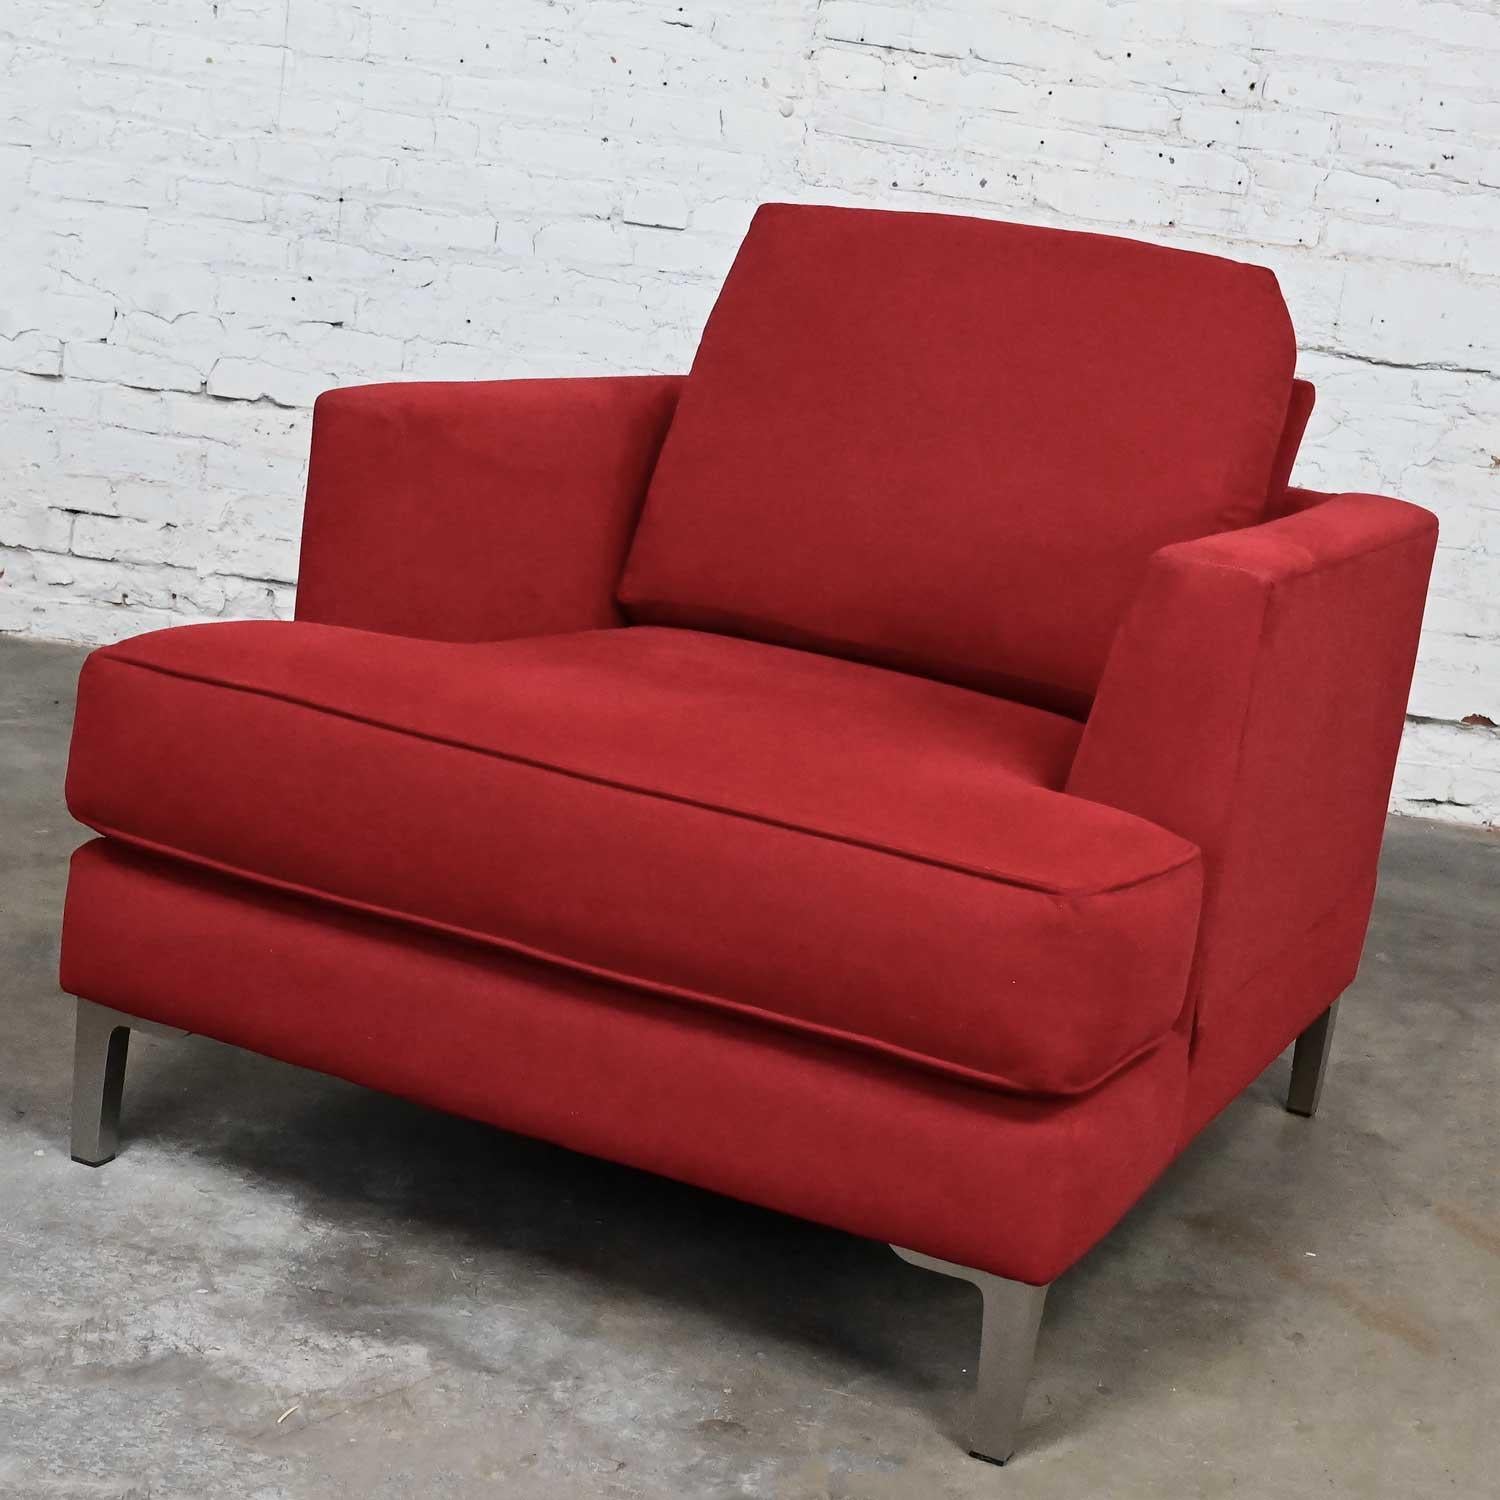 Modern Carter Club Chair Attr Zen Collection Bright Red with Polished Steel Legs For Sale 7